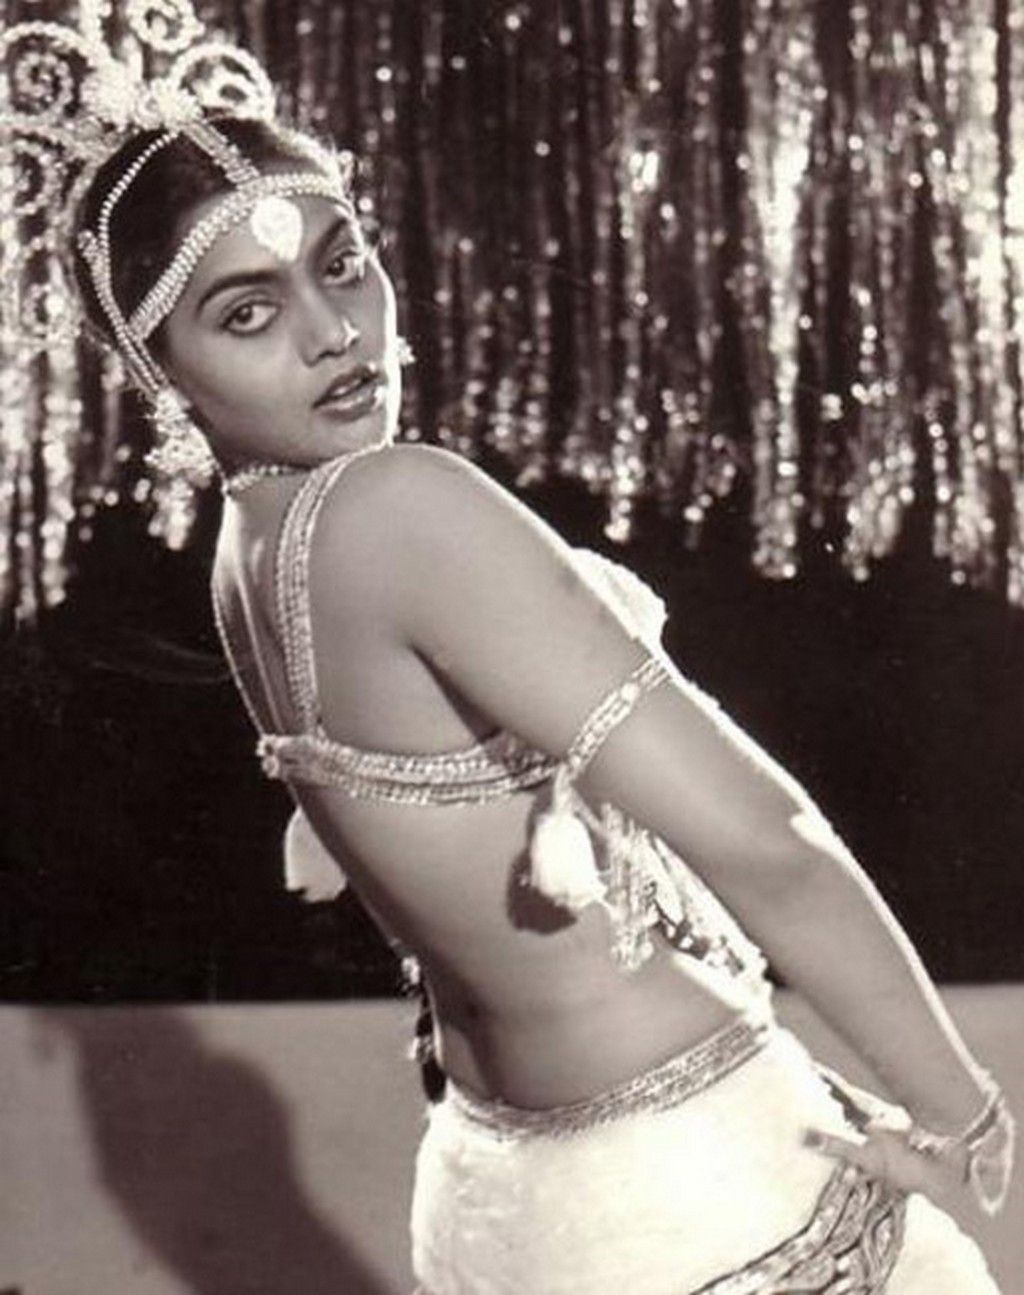 Silk Smitha's Family Slaps A Notice On The Dirty Picture Hot News